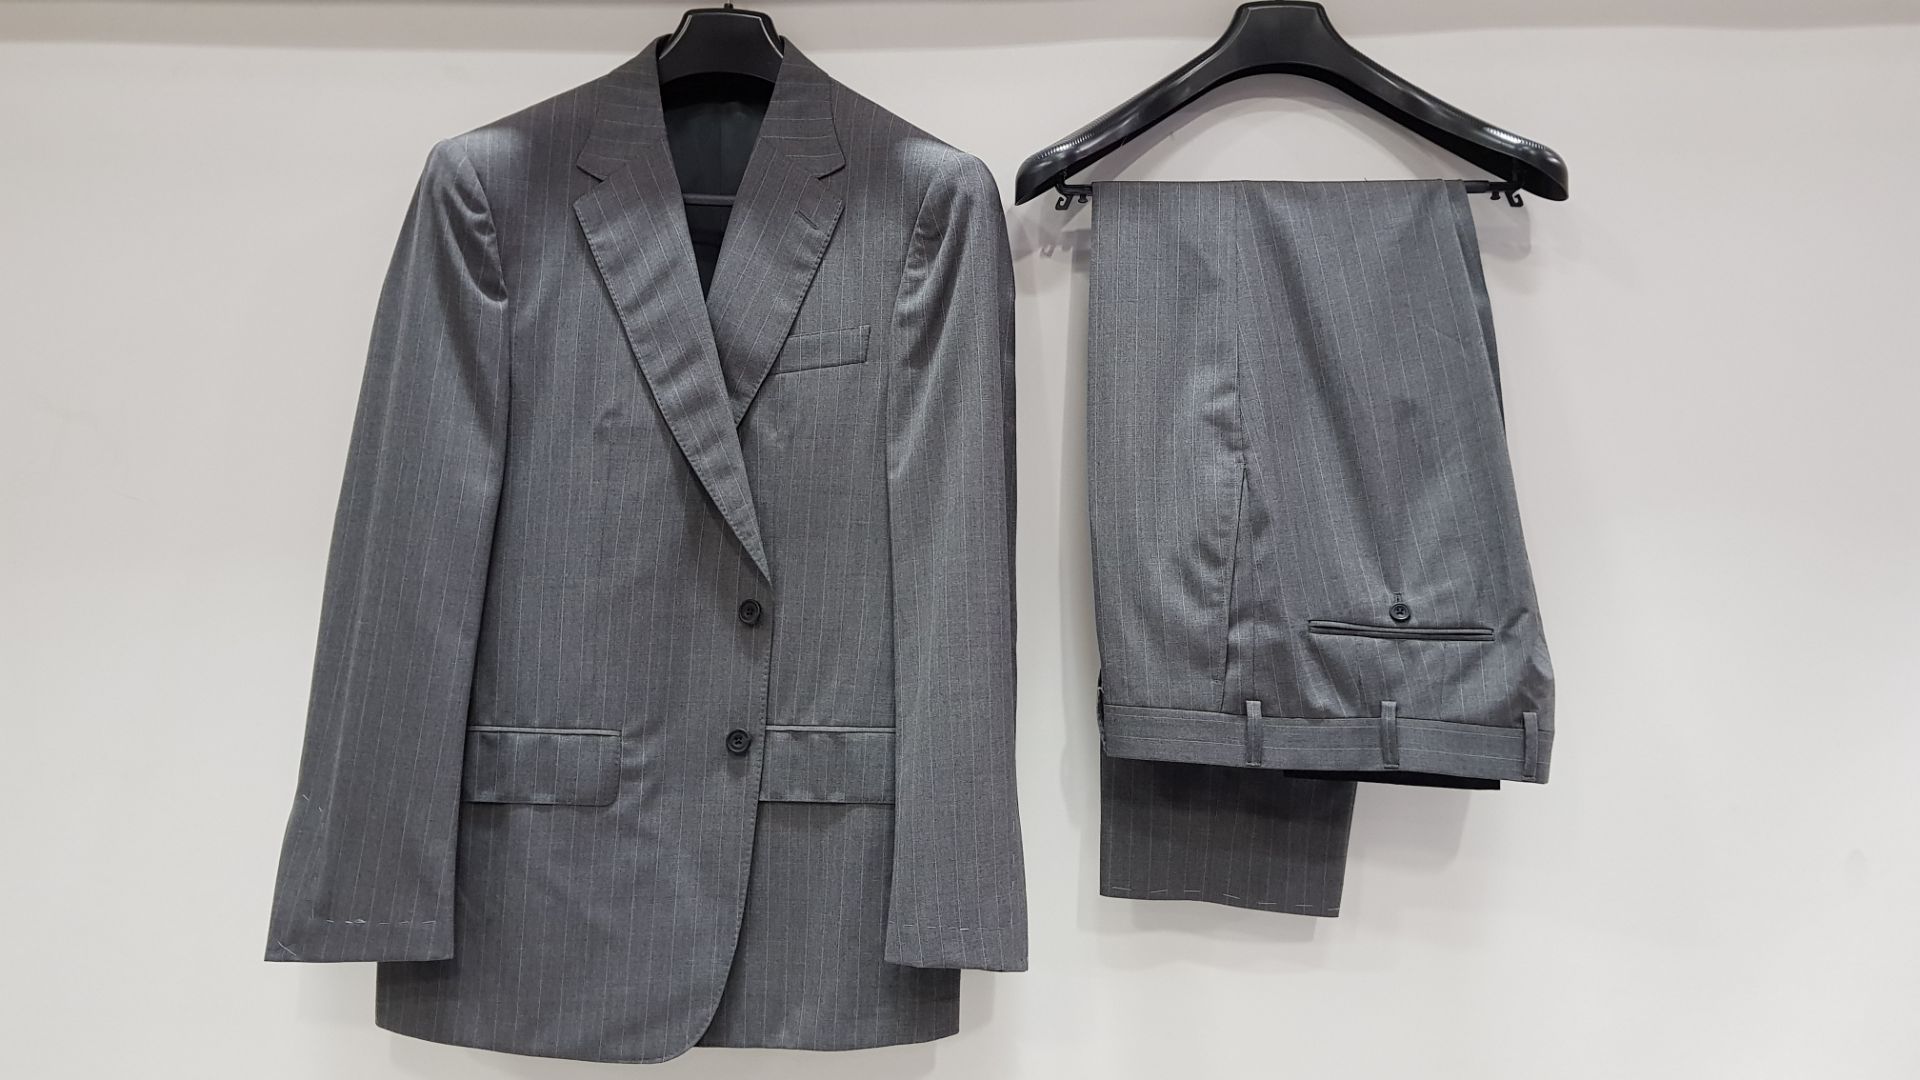 3 X BRAND NEW LUTWYCHE HAND TAILORED DARK GREY PINSTRIPED SUITS SIZE 42R, 48R AND 44R (PLEASE NOTE